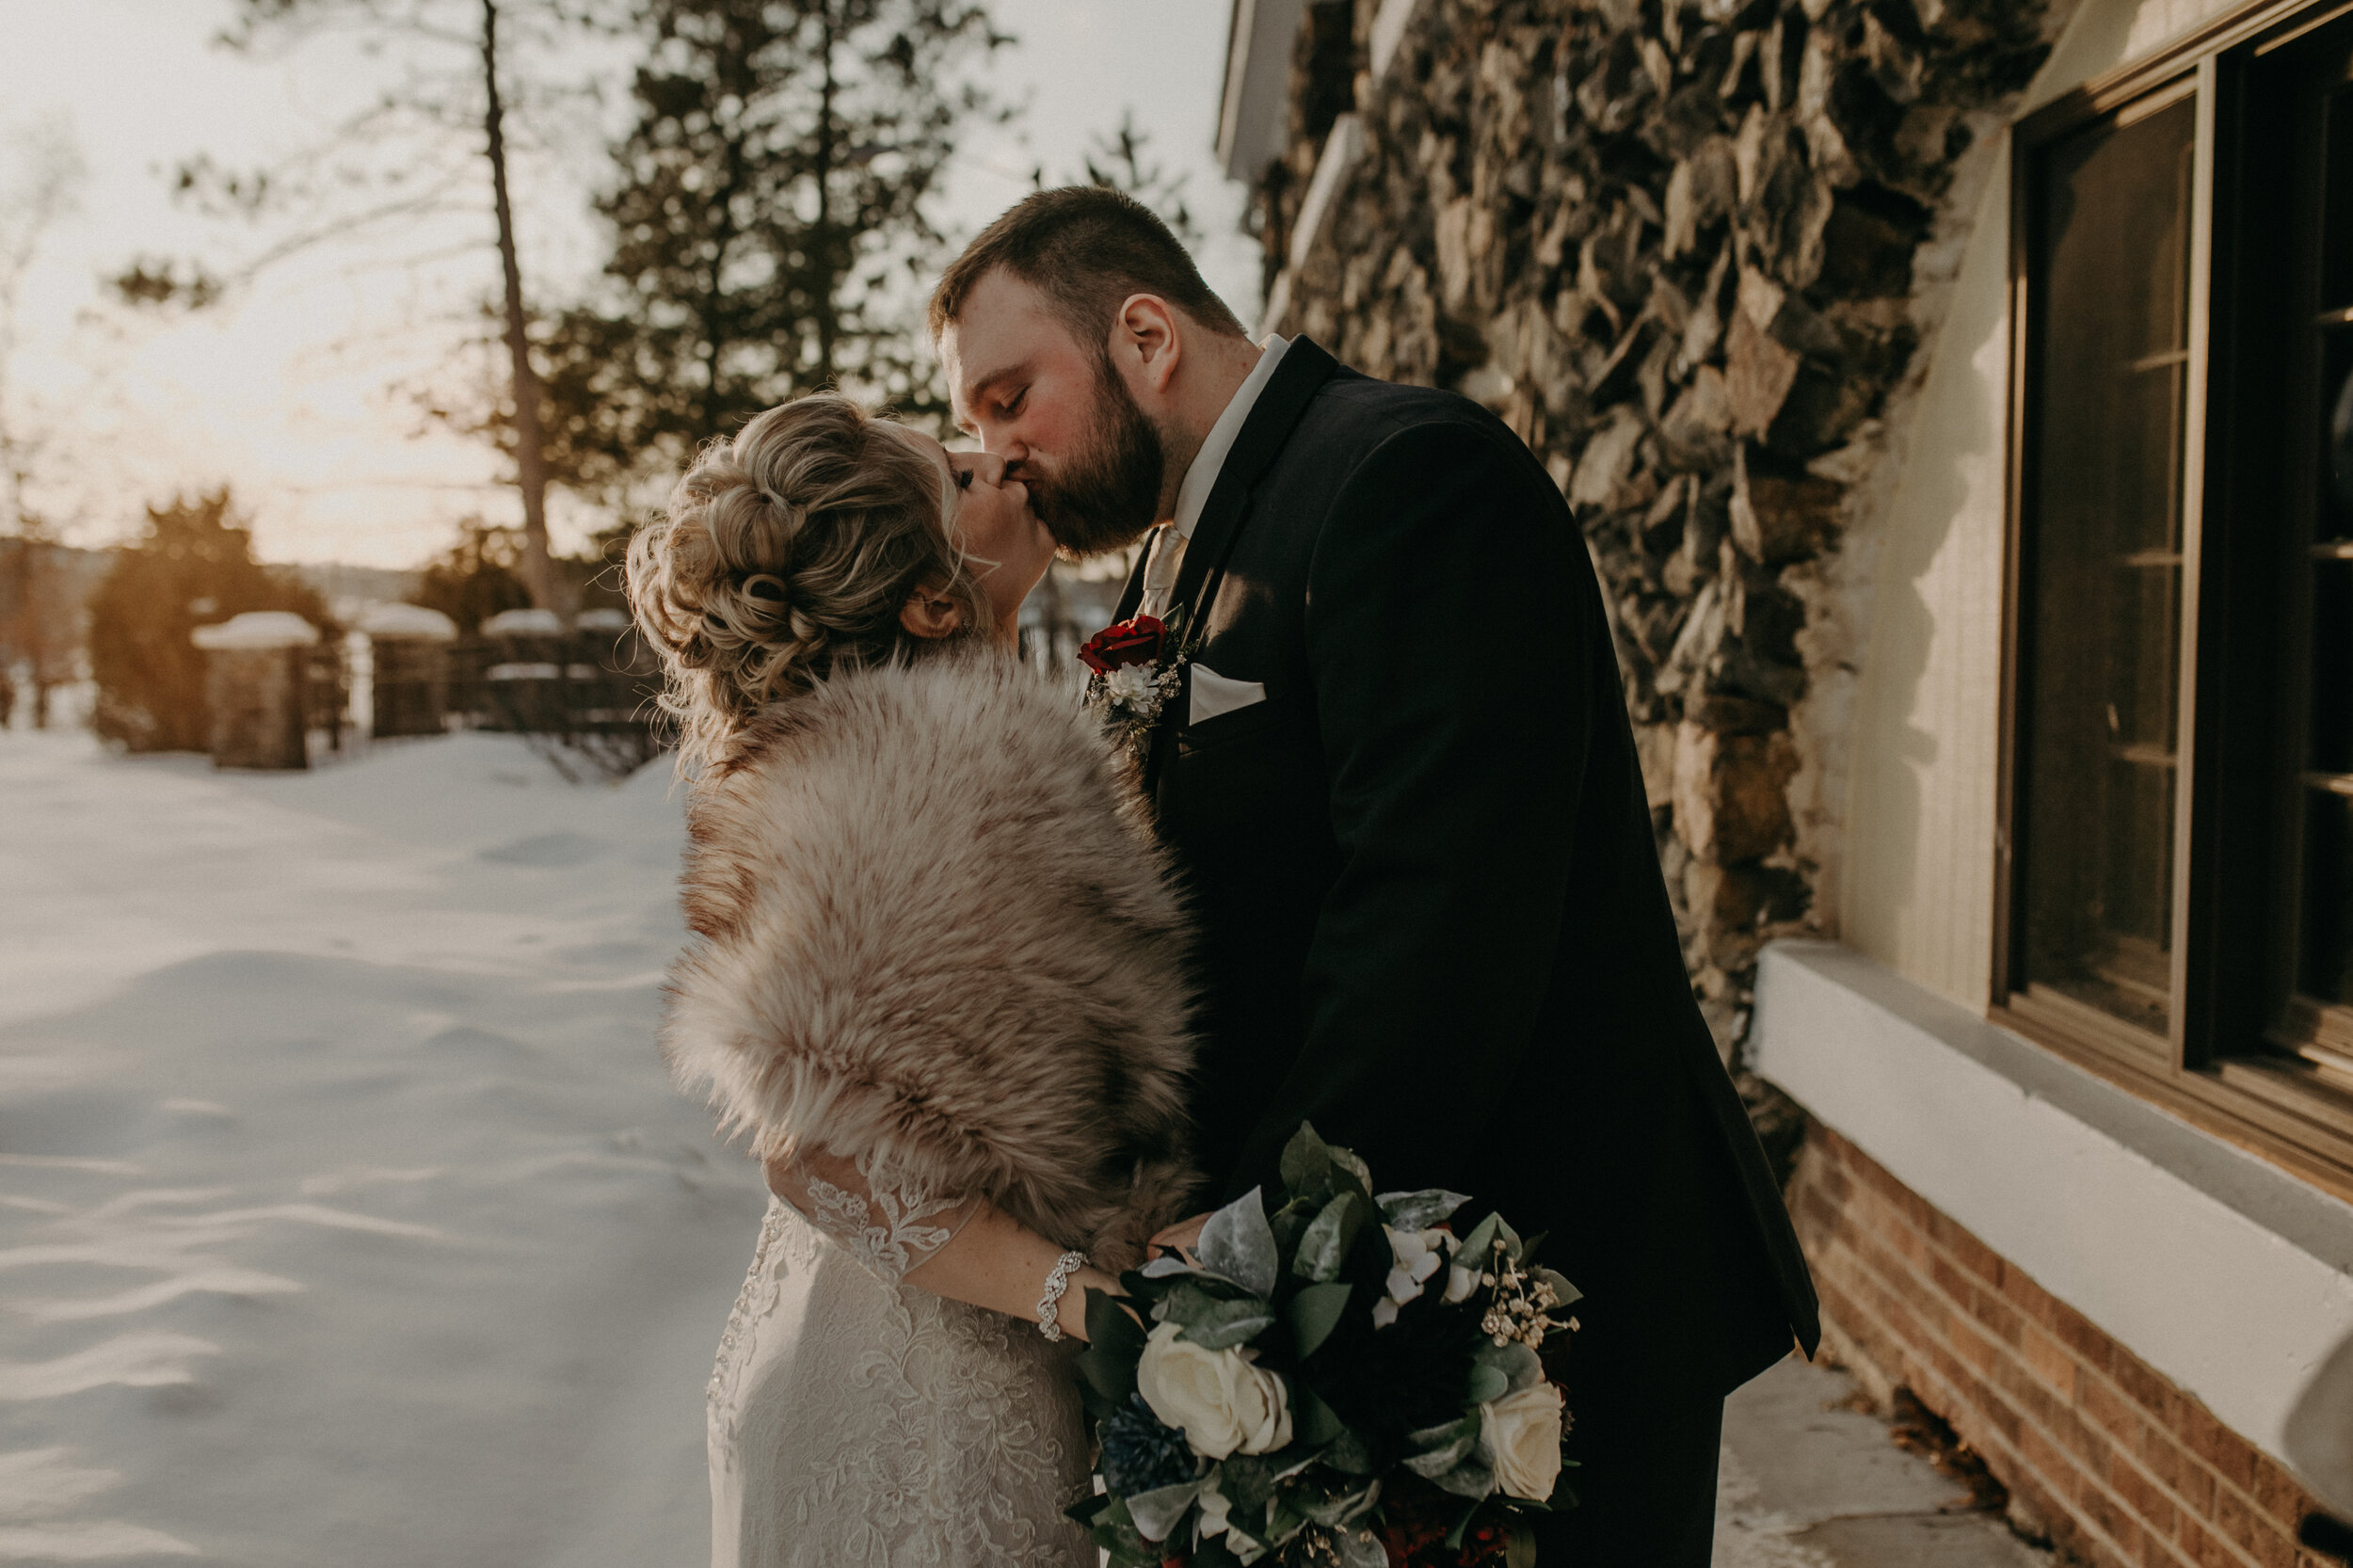  Andrea Wanger Photography cozy winter Wisconsin wedding. Perfect Wisconsin wedding in February. Elegant winter wedding bride and groom photos outside in the snow. Sunset photos. 